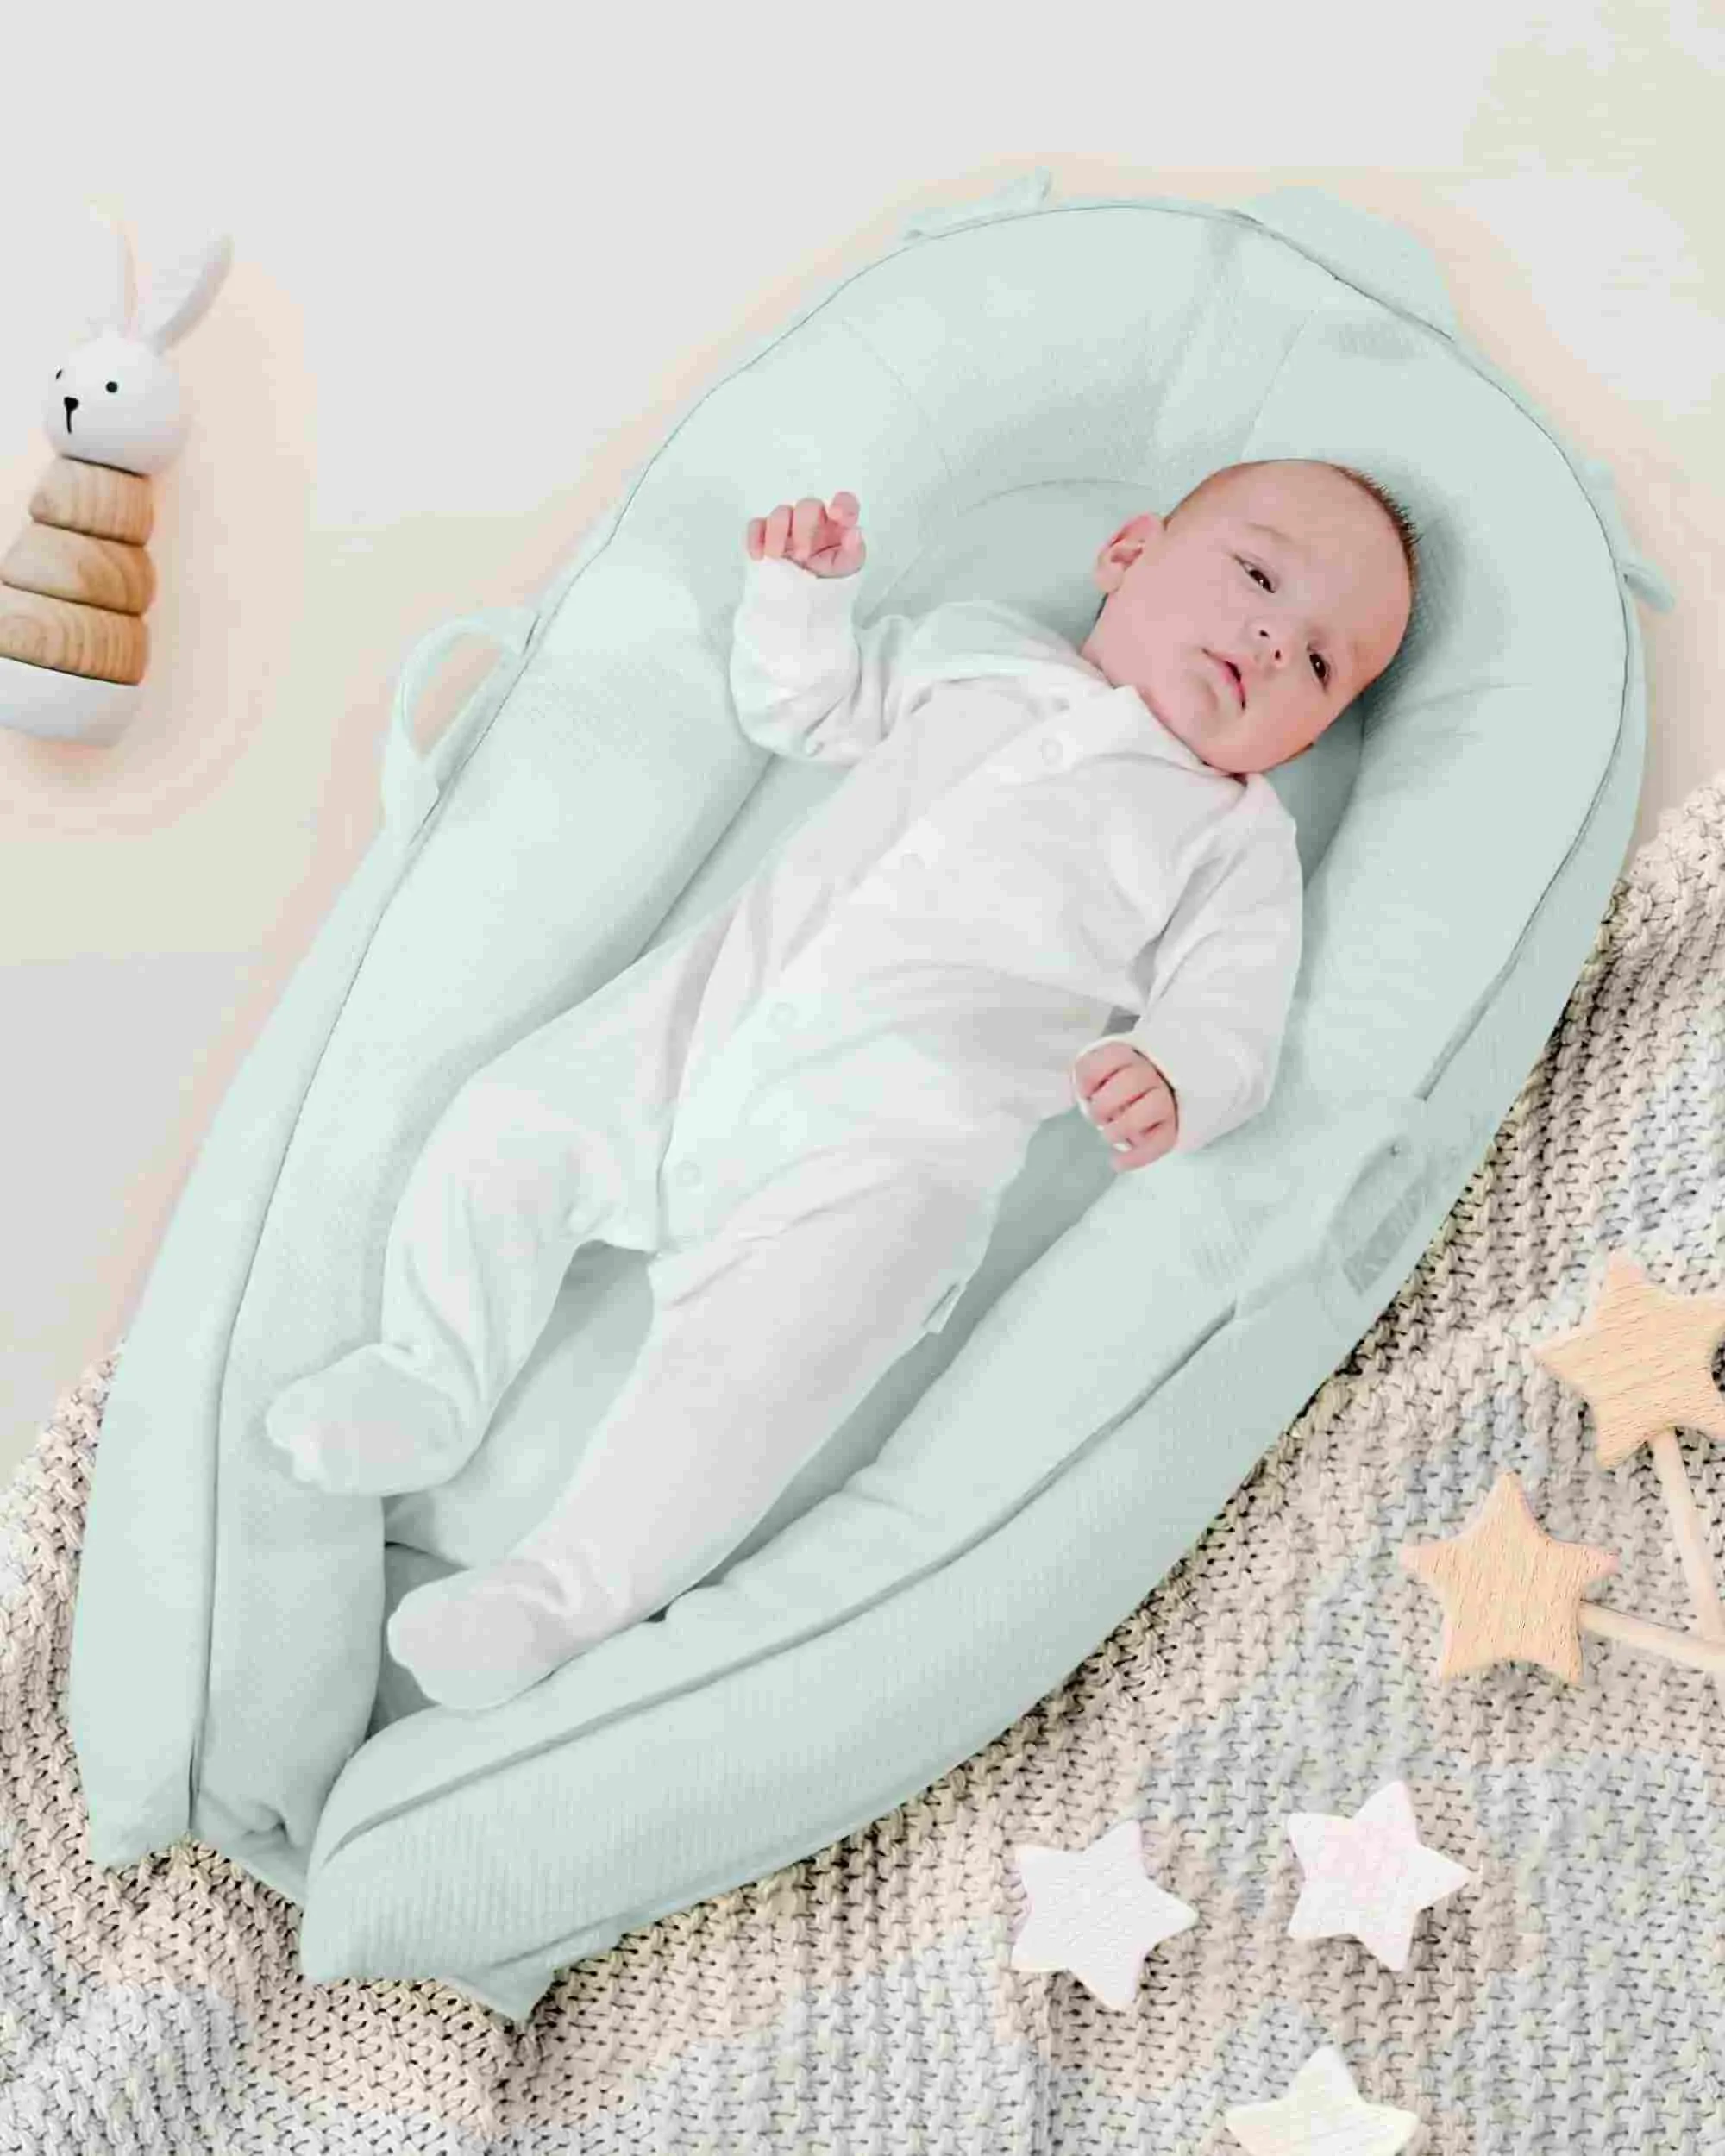 Adorable baby lying down in the smooth blue pod.